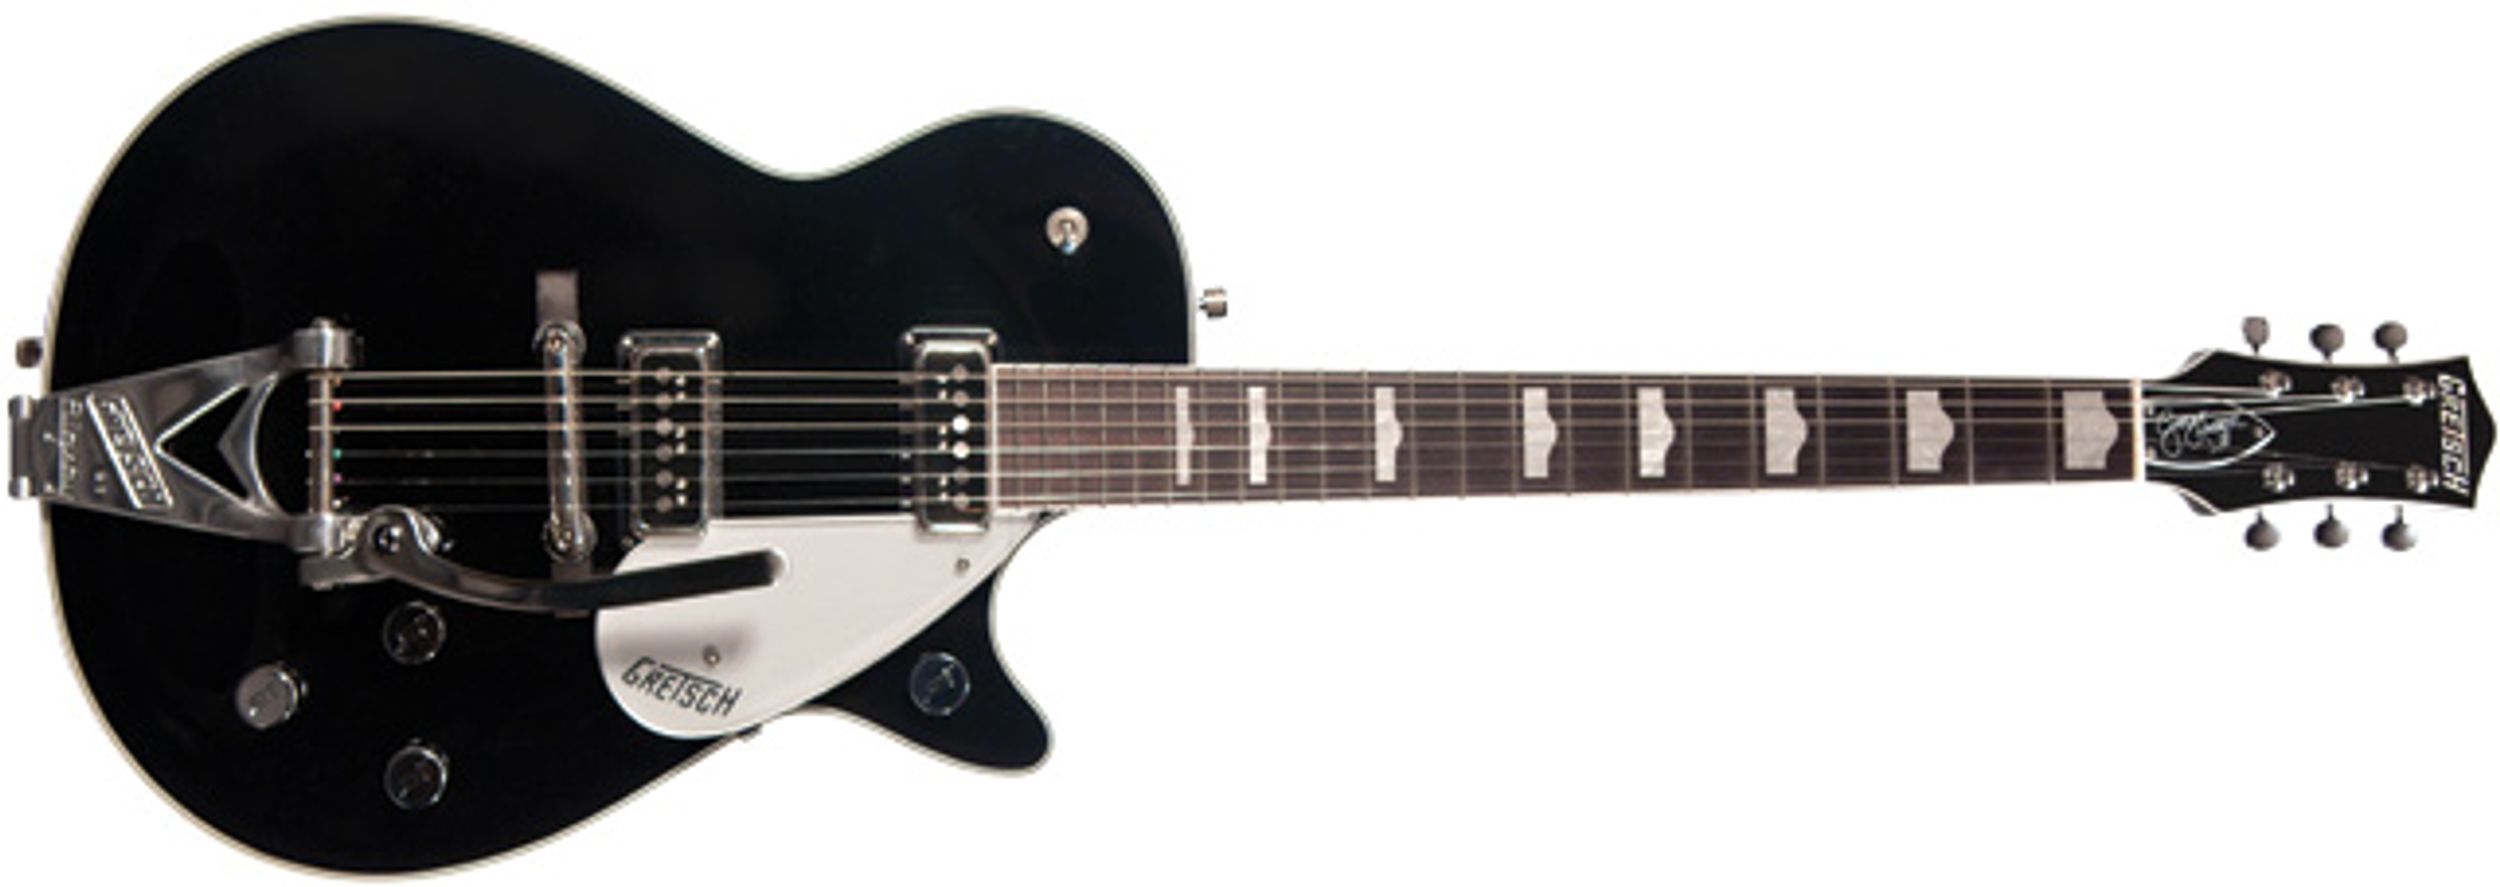 Gretsch G6128T-GH George Harrison Signature Duo Jet Electric Guitar Review